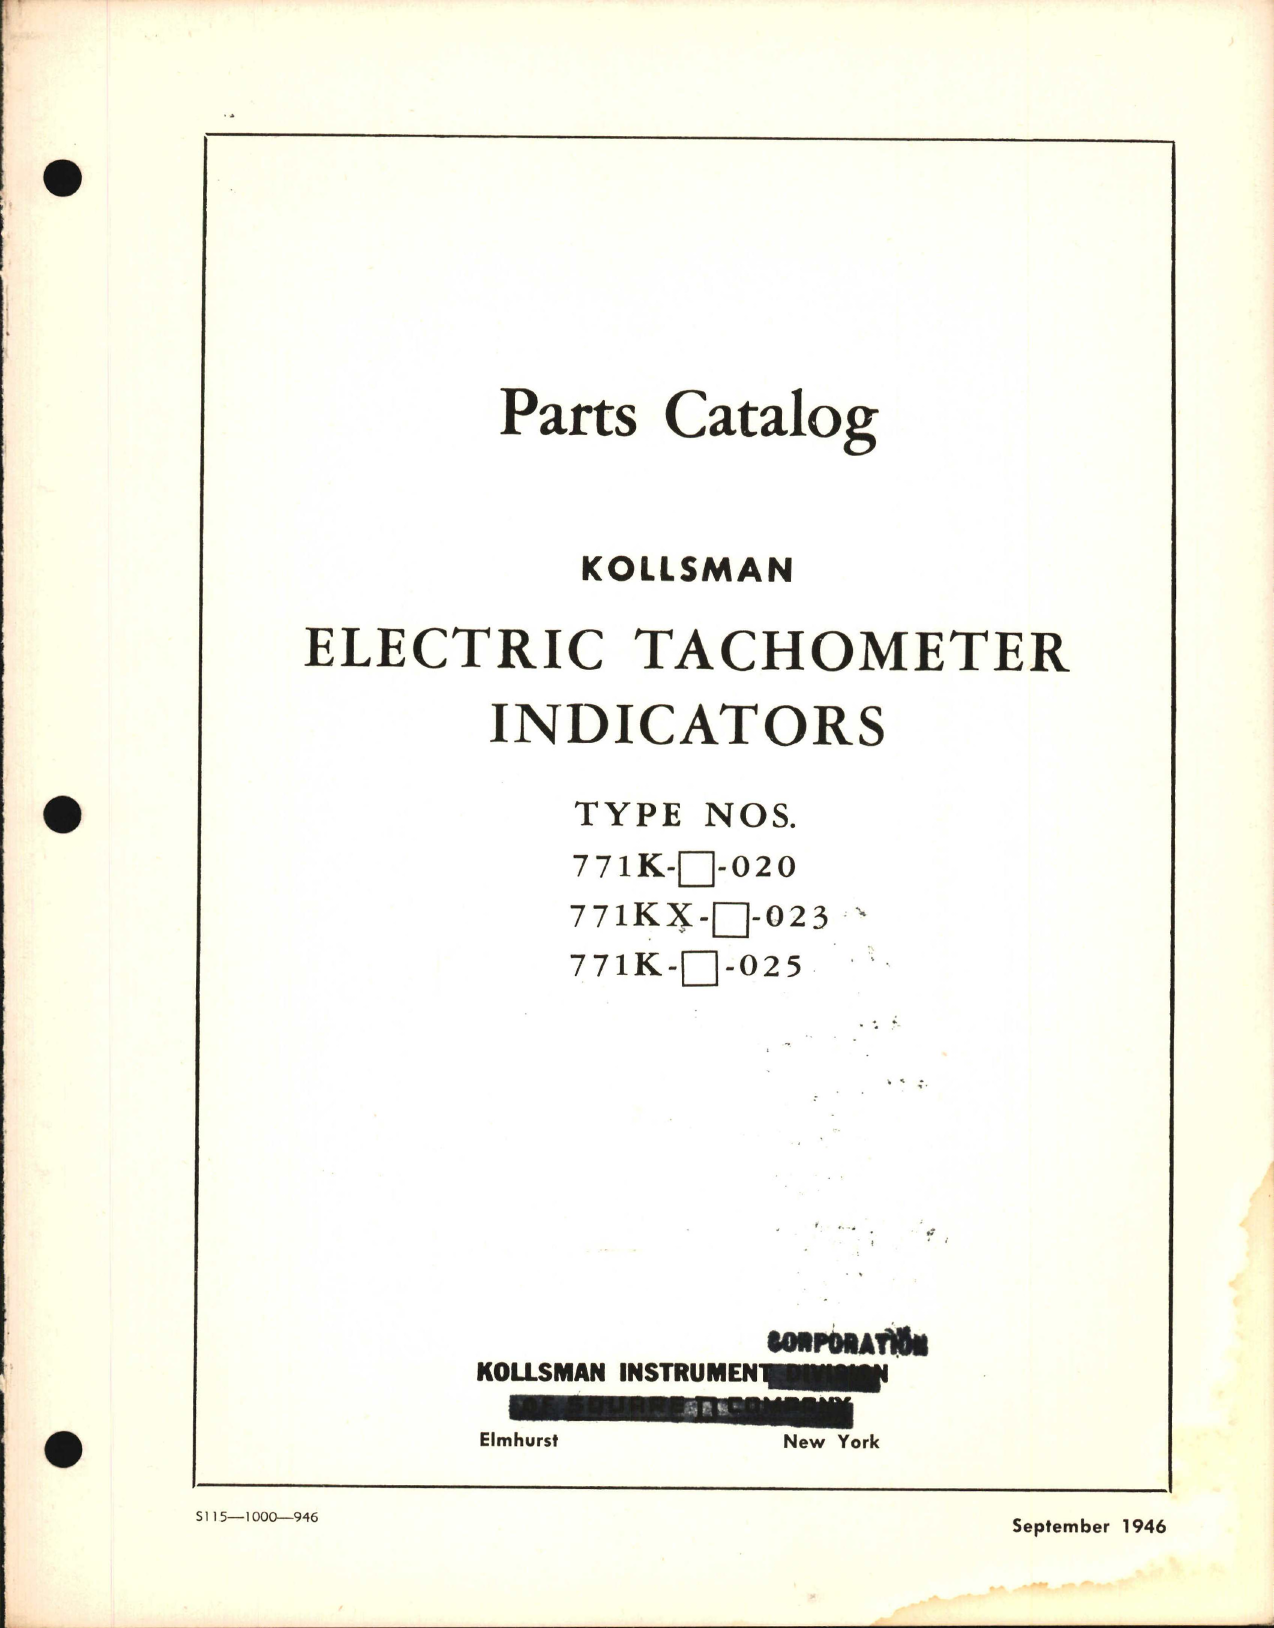 Sample page 1 from AirCorps Library document: Parts Catalog for Kollsman Electric Tachometer Indicators